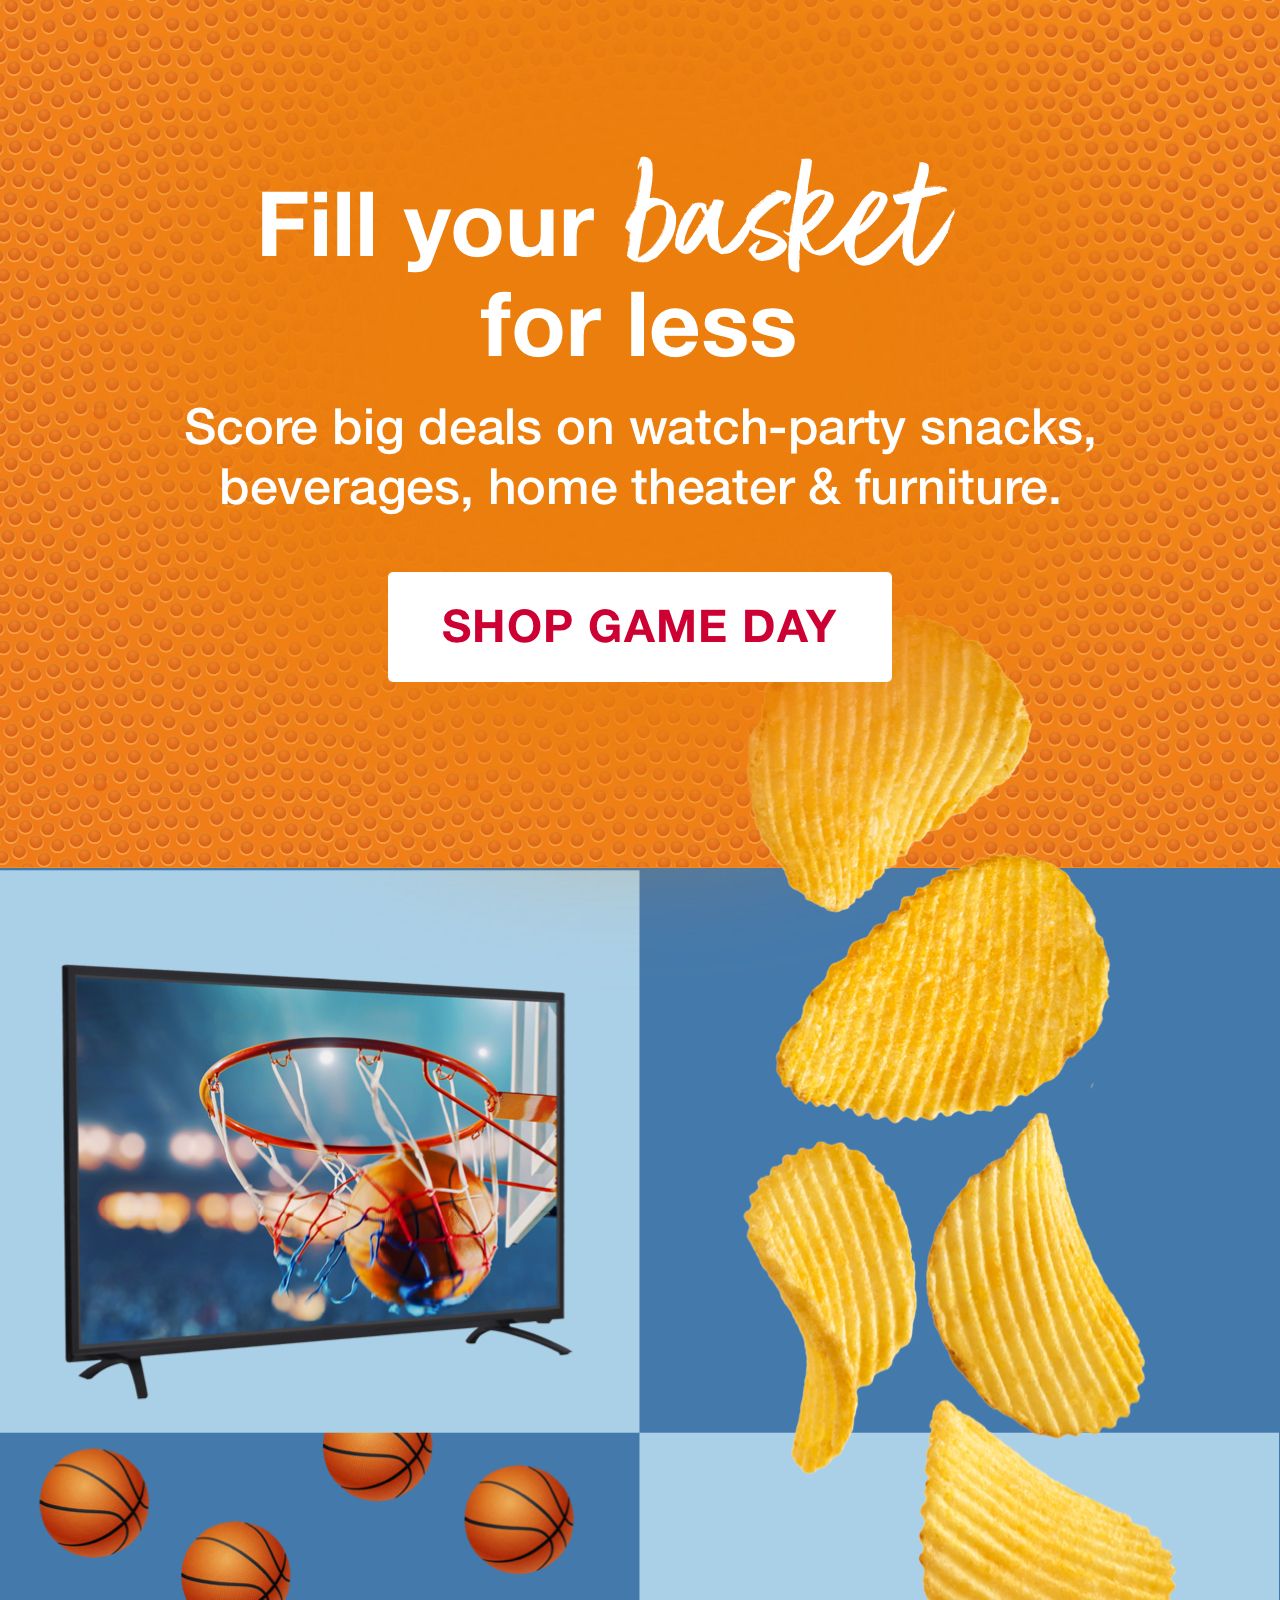 Fill your basket for less. Score big deals on watch-party snacks, beverages, home theater and furniture. Click to shop game day.